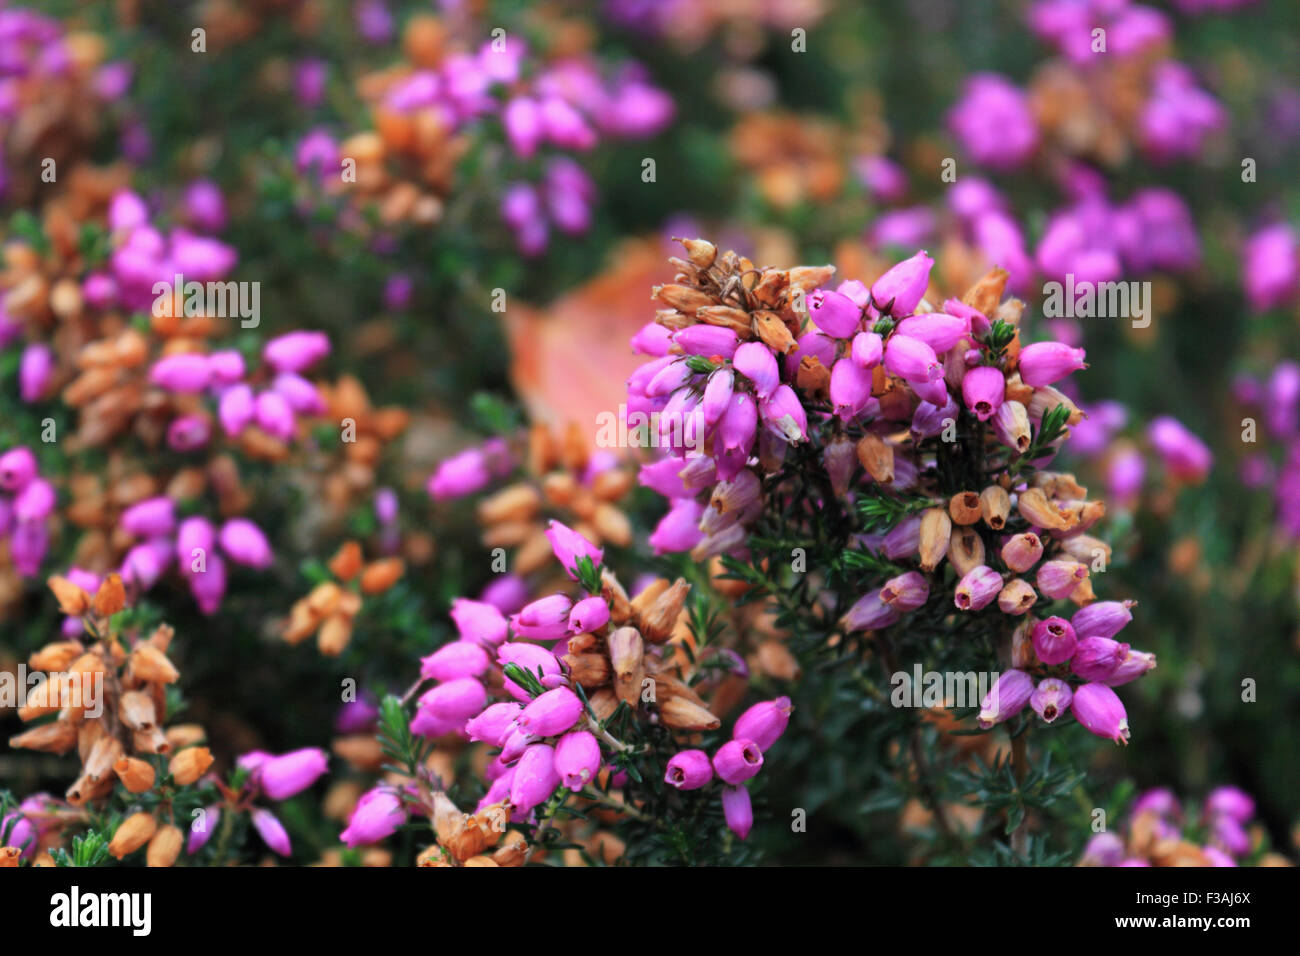 Wisley Gardens, Surrey, UK. 4th October 2015. Erica cinerea commonly known as heather, is a perennial low growing shrub which provides good autumn colour. This purple variety Purple Beauty is growing at RHS Wisley Gardens, Surrey, UK. Credit:  Julia Gavin UK/Alamy Live News Stock Photo